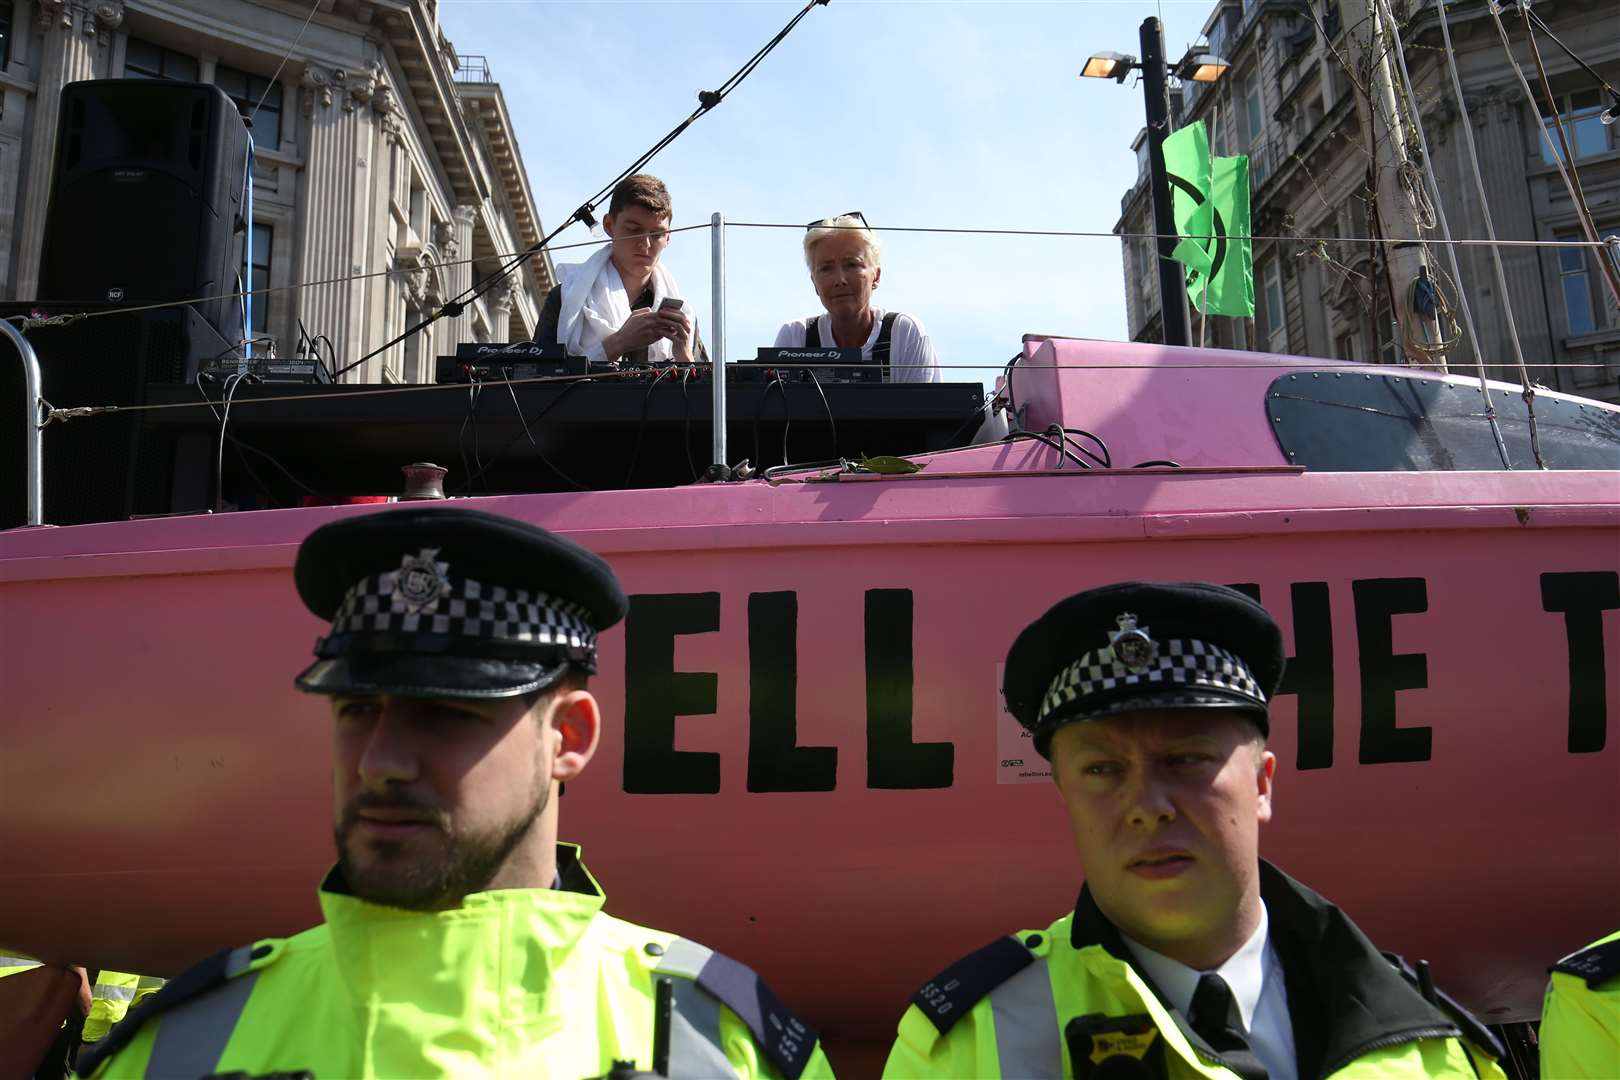 Police surround an Extinction Rebellion boat at an earlier street protest (PA)